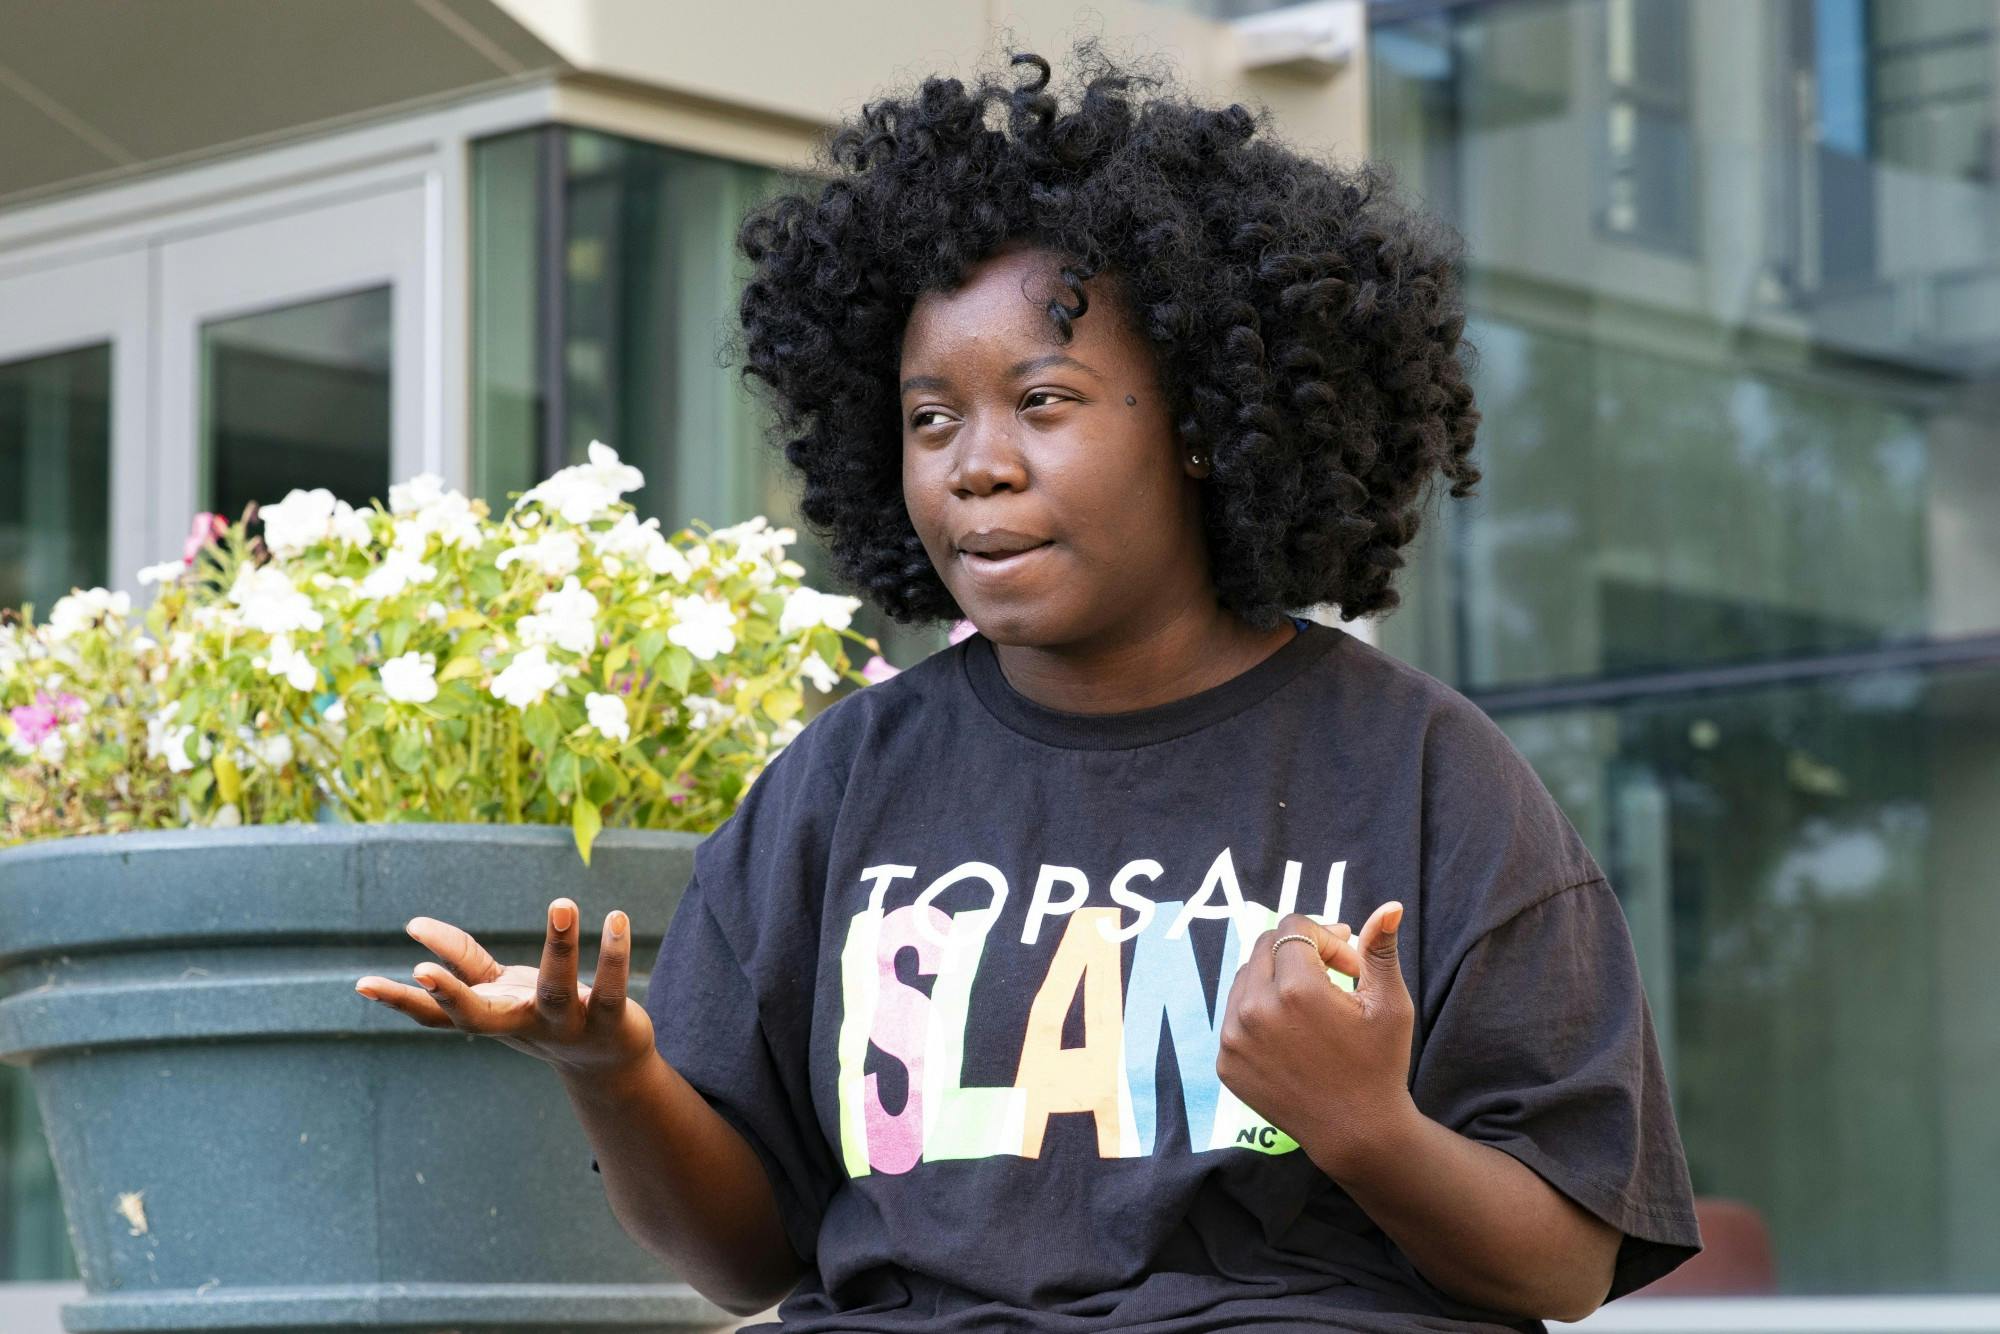 Junior Massa Massaley explains what it feels like to go to Indiana University as a Black student Oct. 6, in front of the Global International Studies Building in Bloomington. “Being Black is like being very hyper visible but at the same time being invisible,” she said.